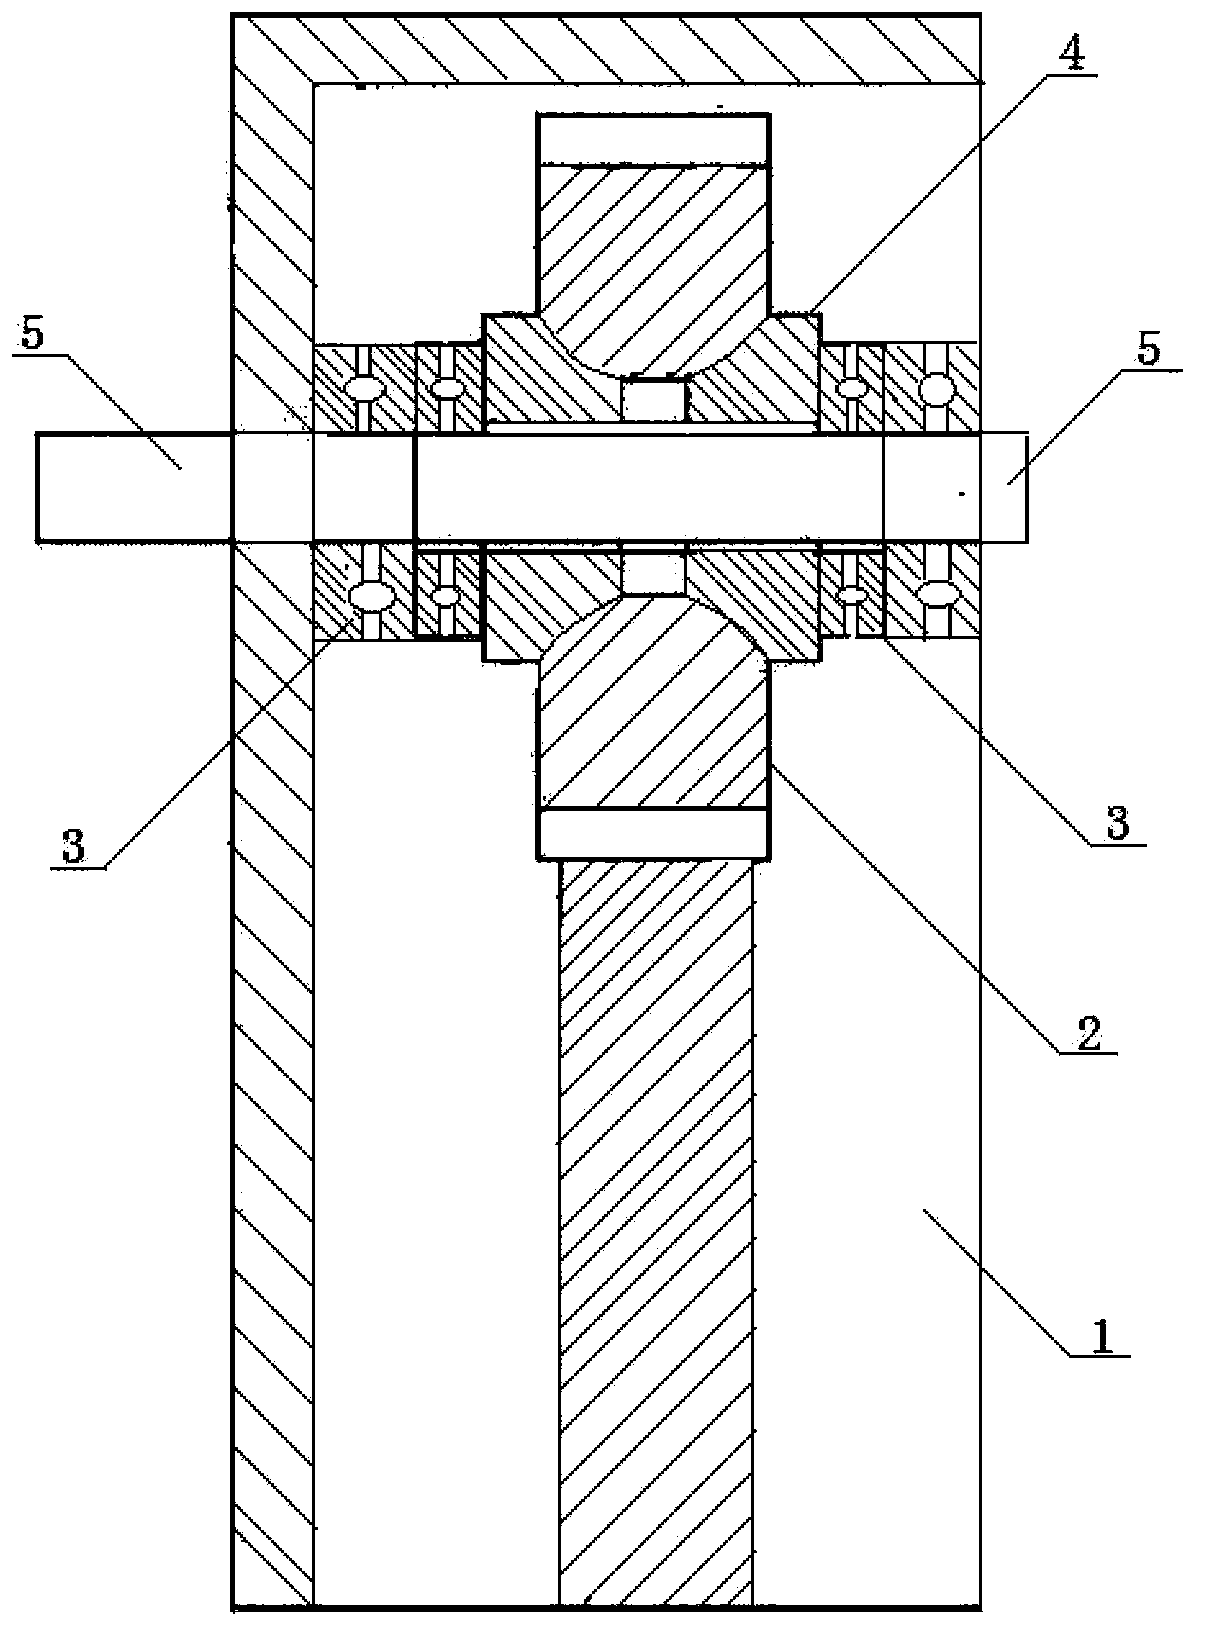 Speed reducer thrust bearing structure